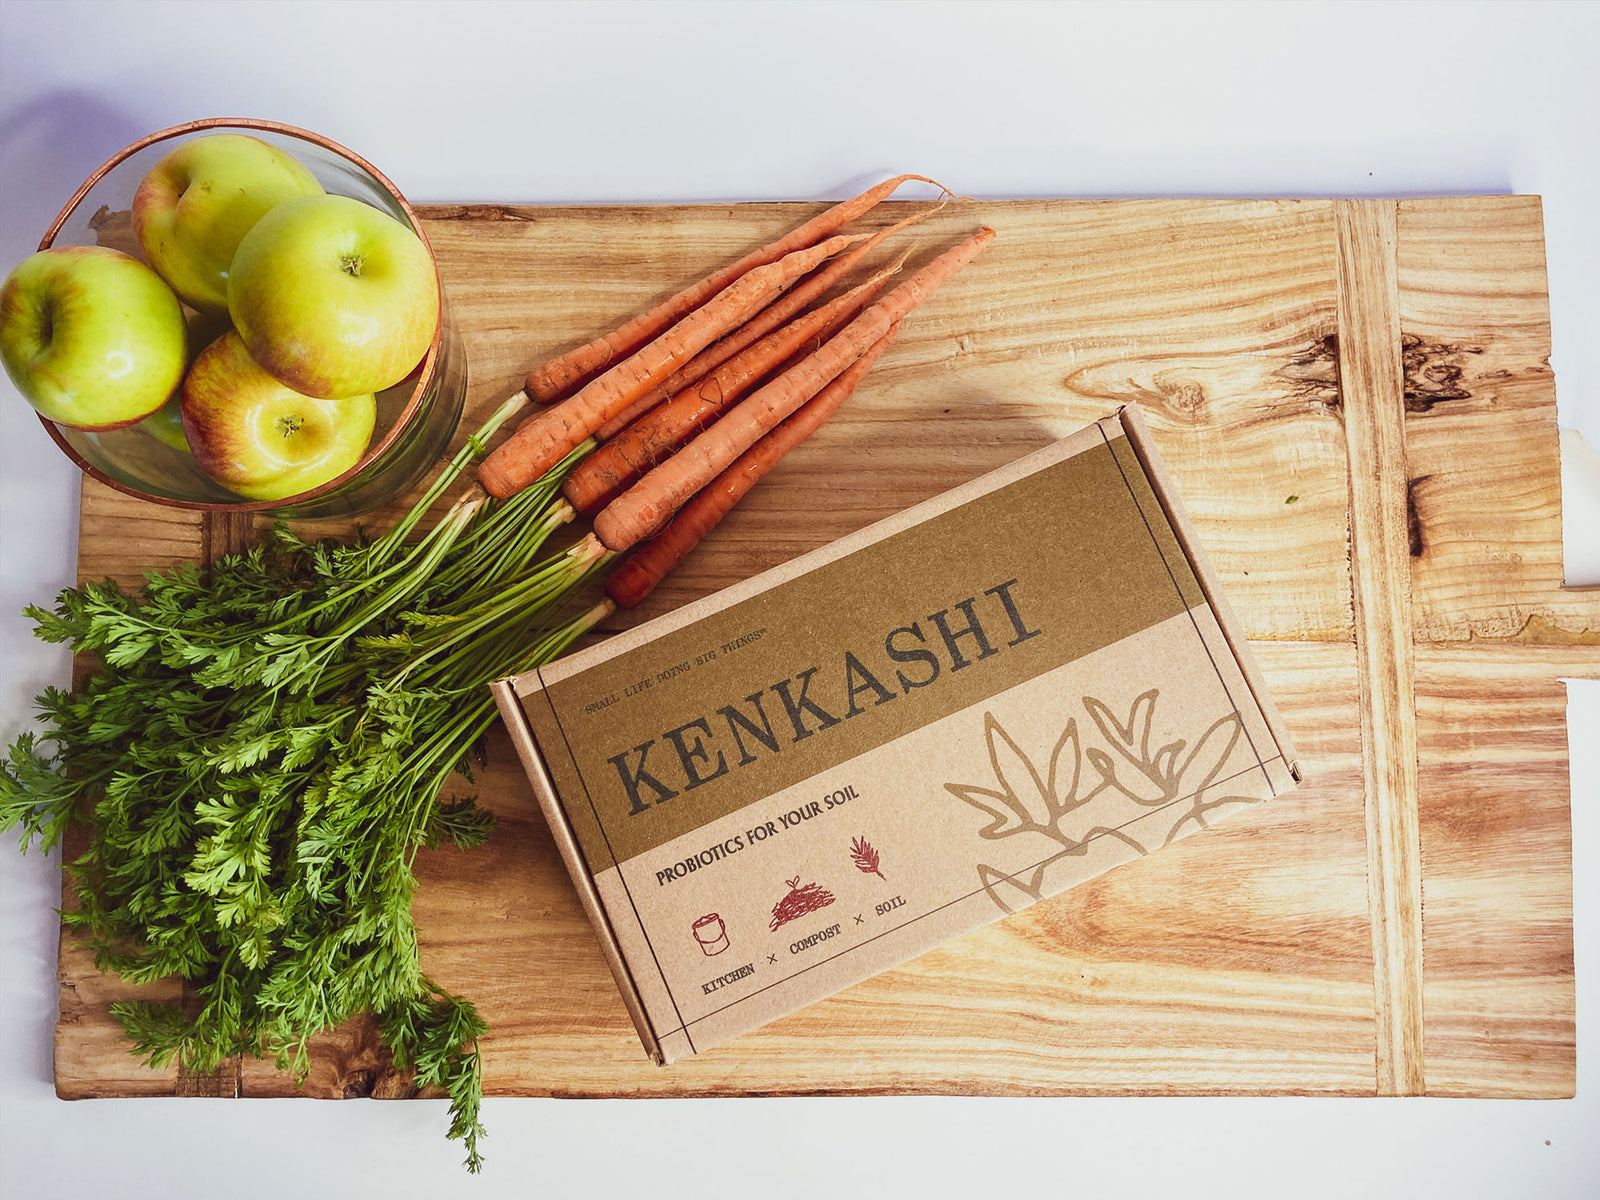 Kenkashi box of inoculated microbial kenaf in box on a wood cutting board with farm fresh carrots and apples